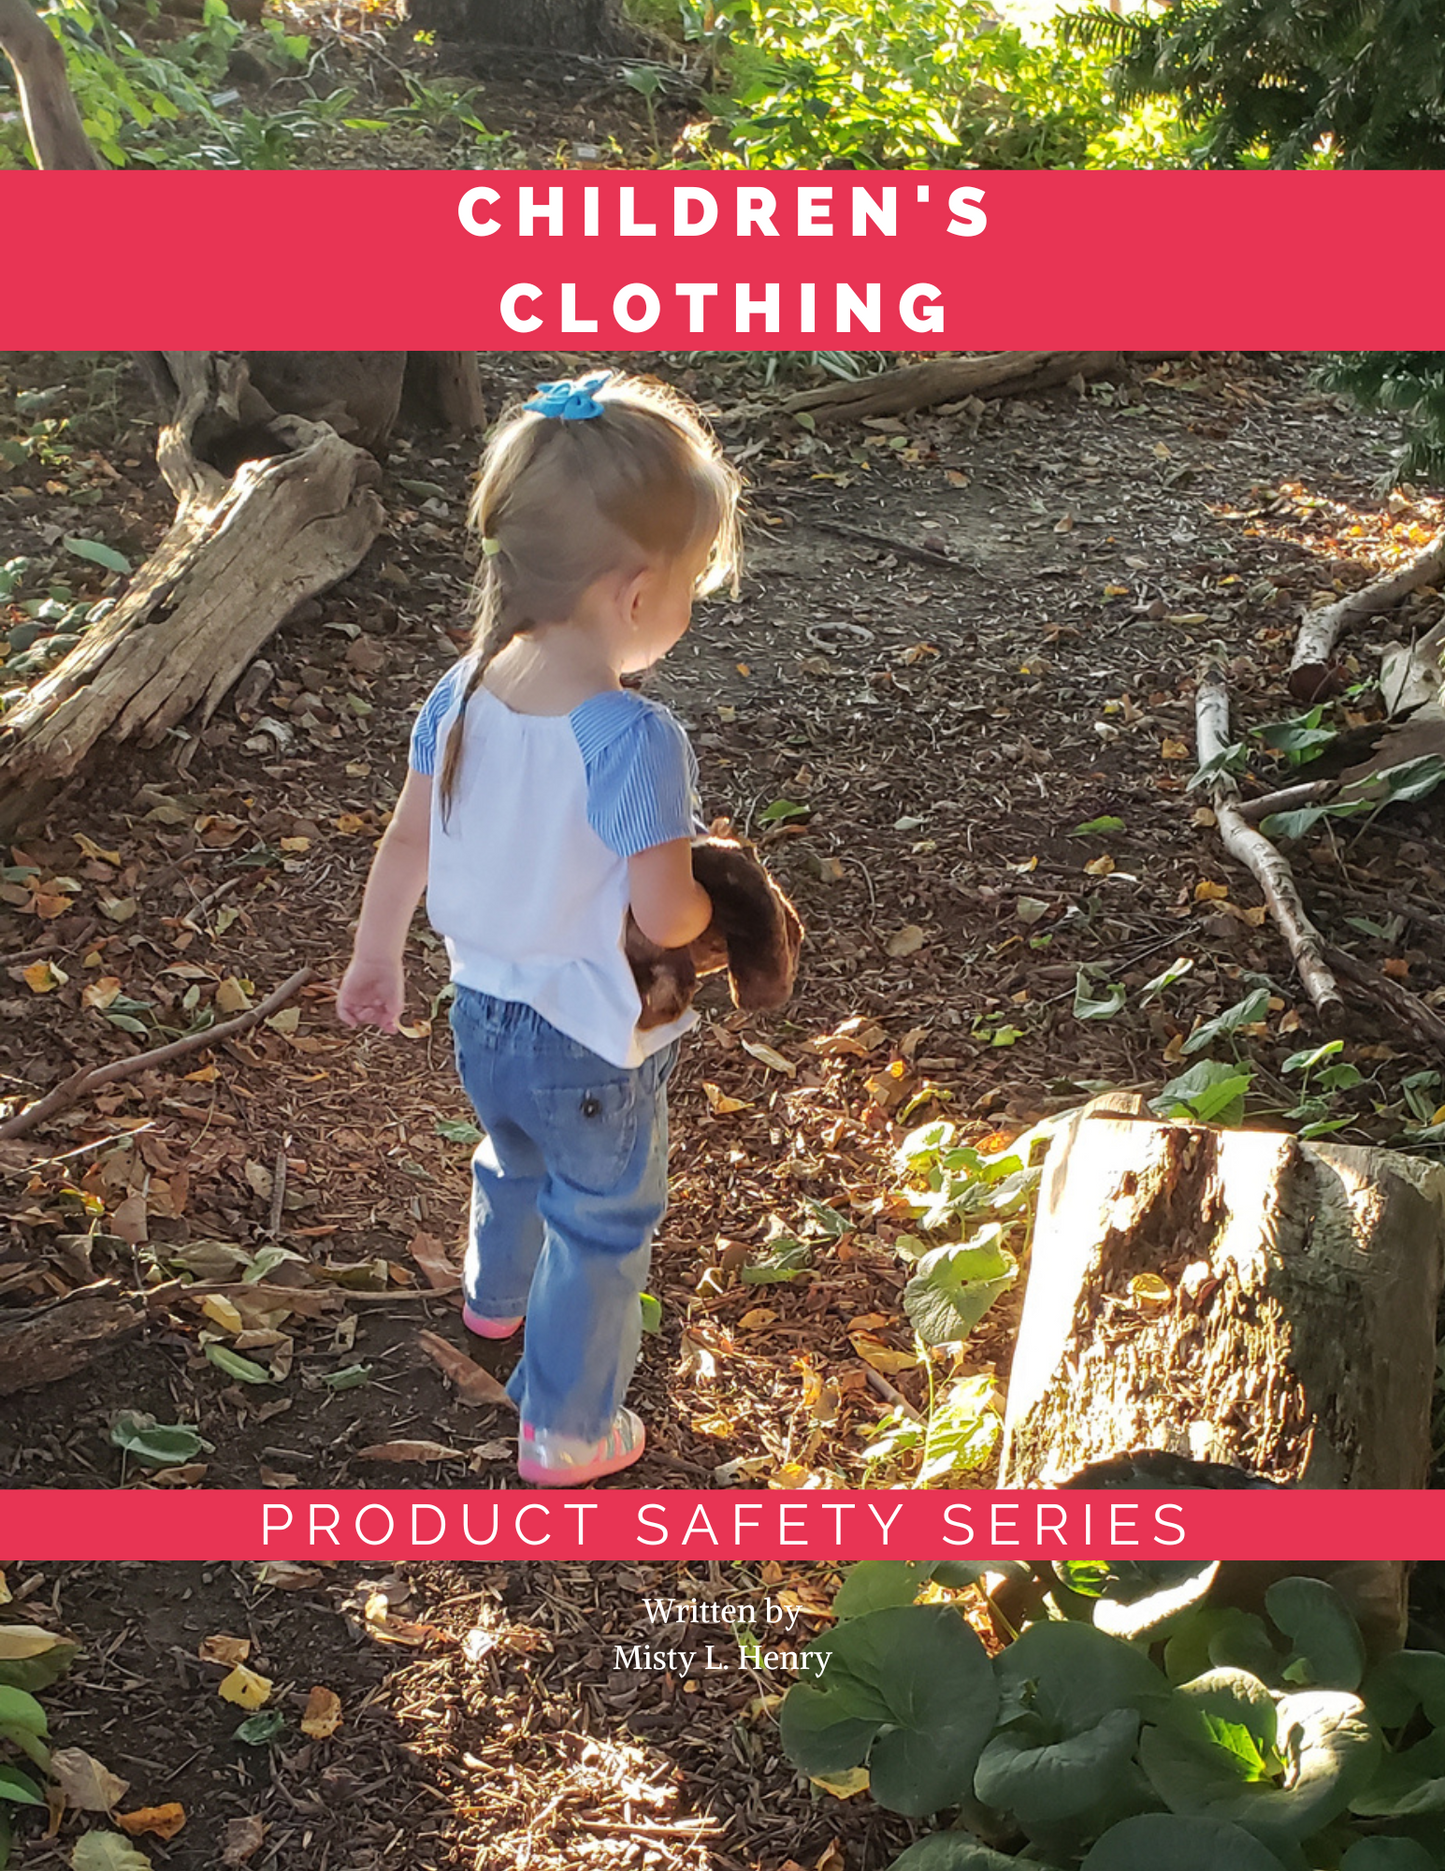 The Children's Clothing Digital Book